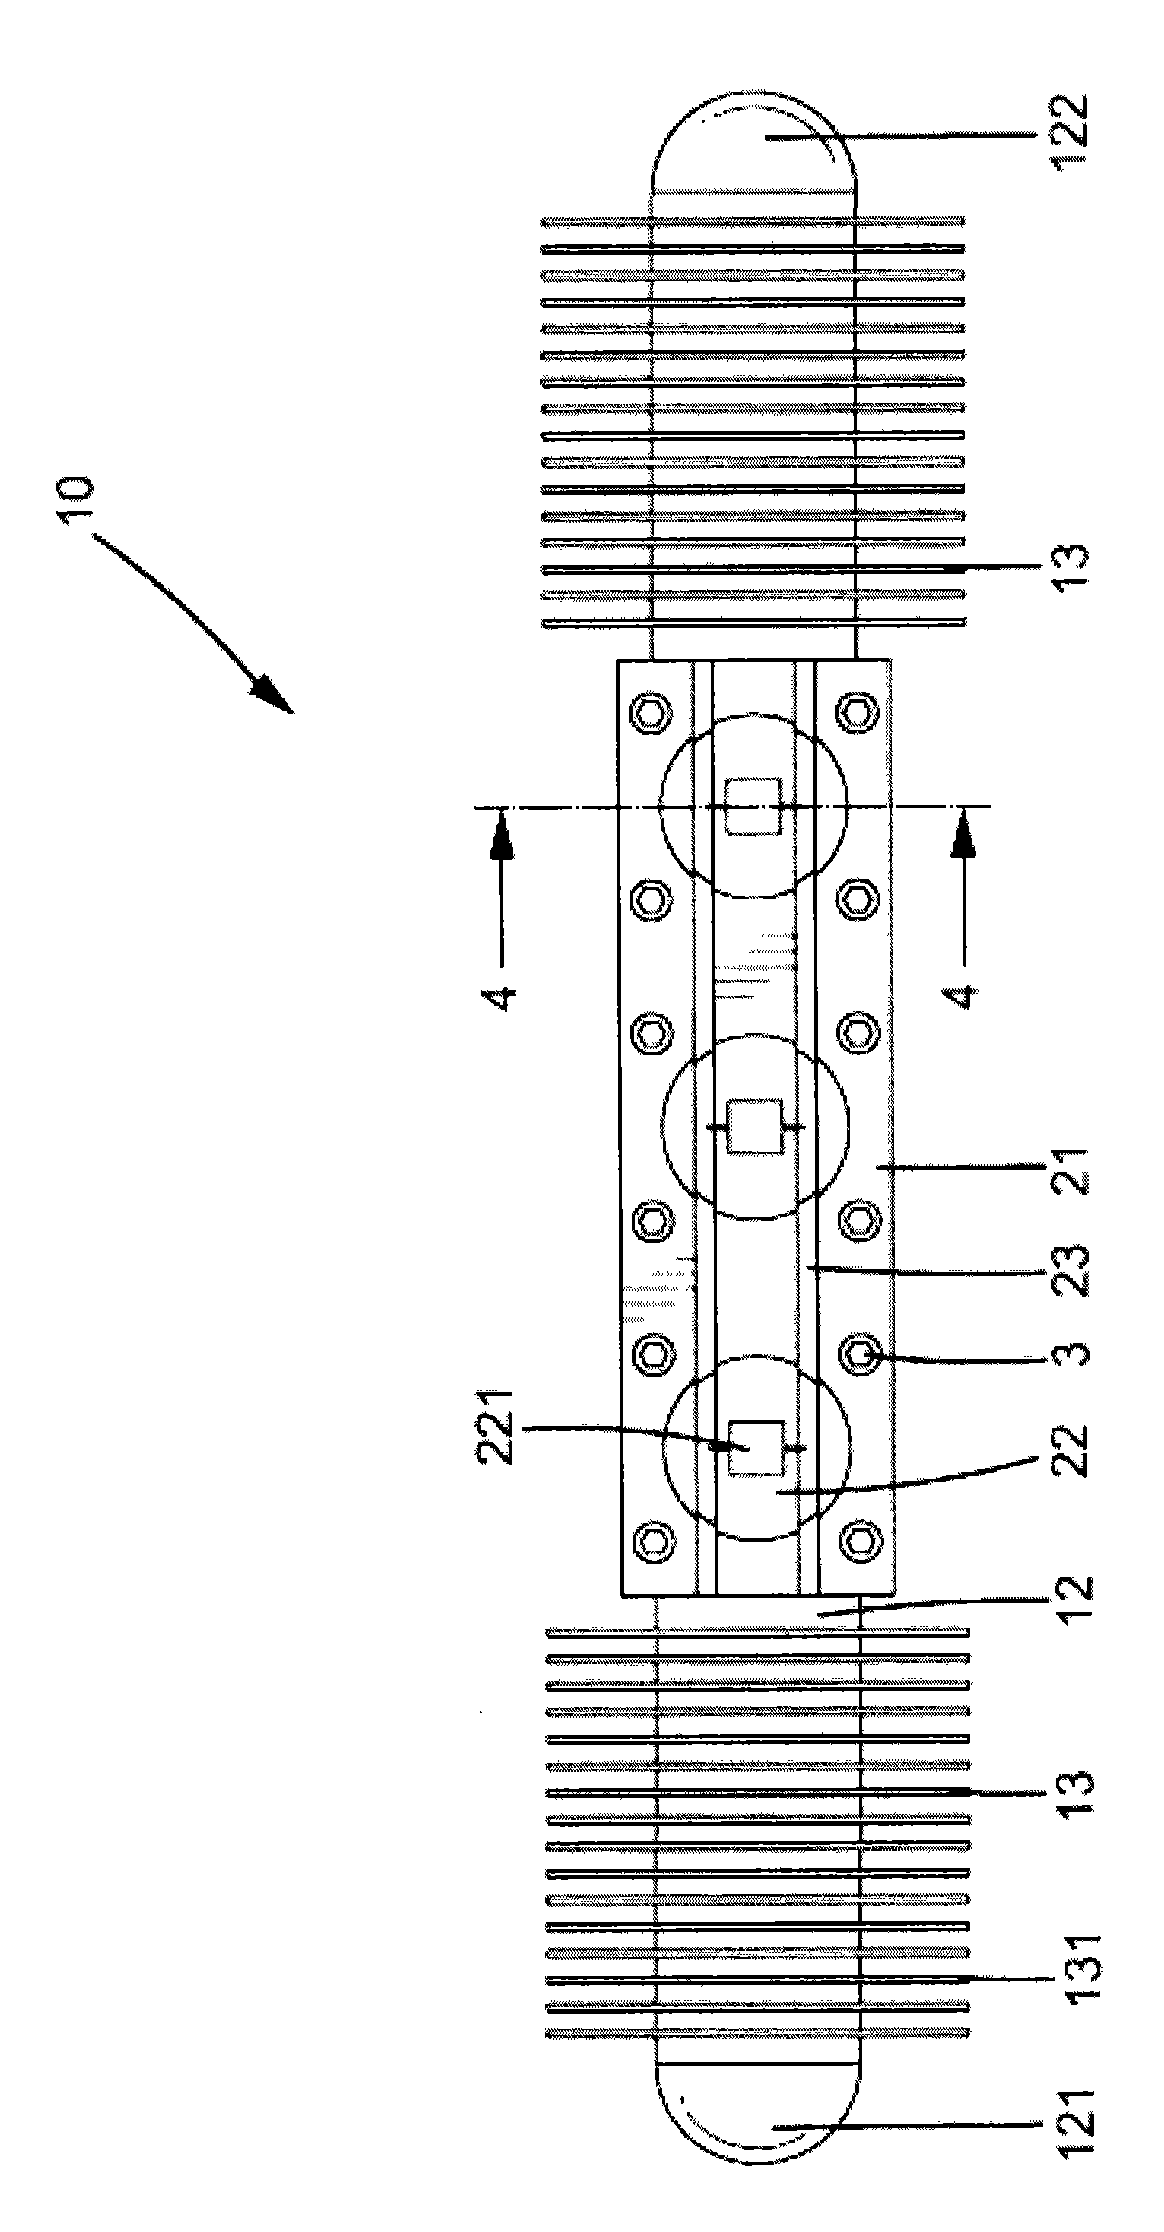 High-radiating light-emitting diode module and light-emitting diode lamps